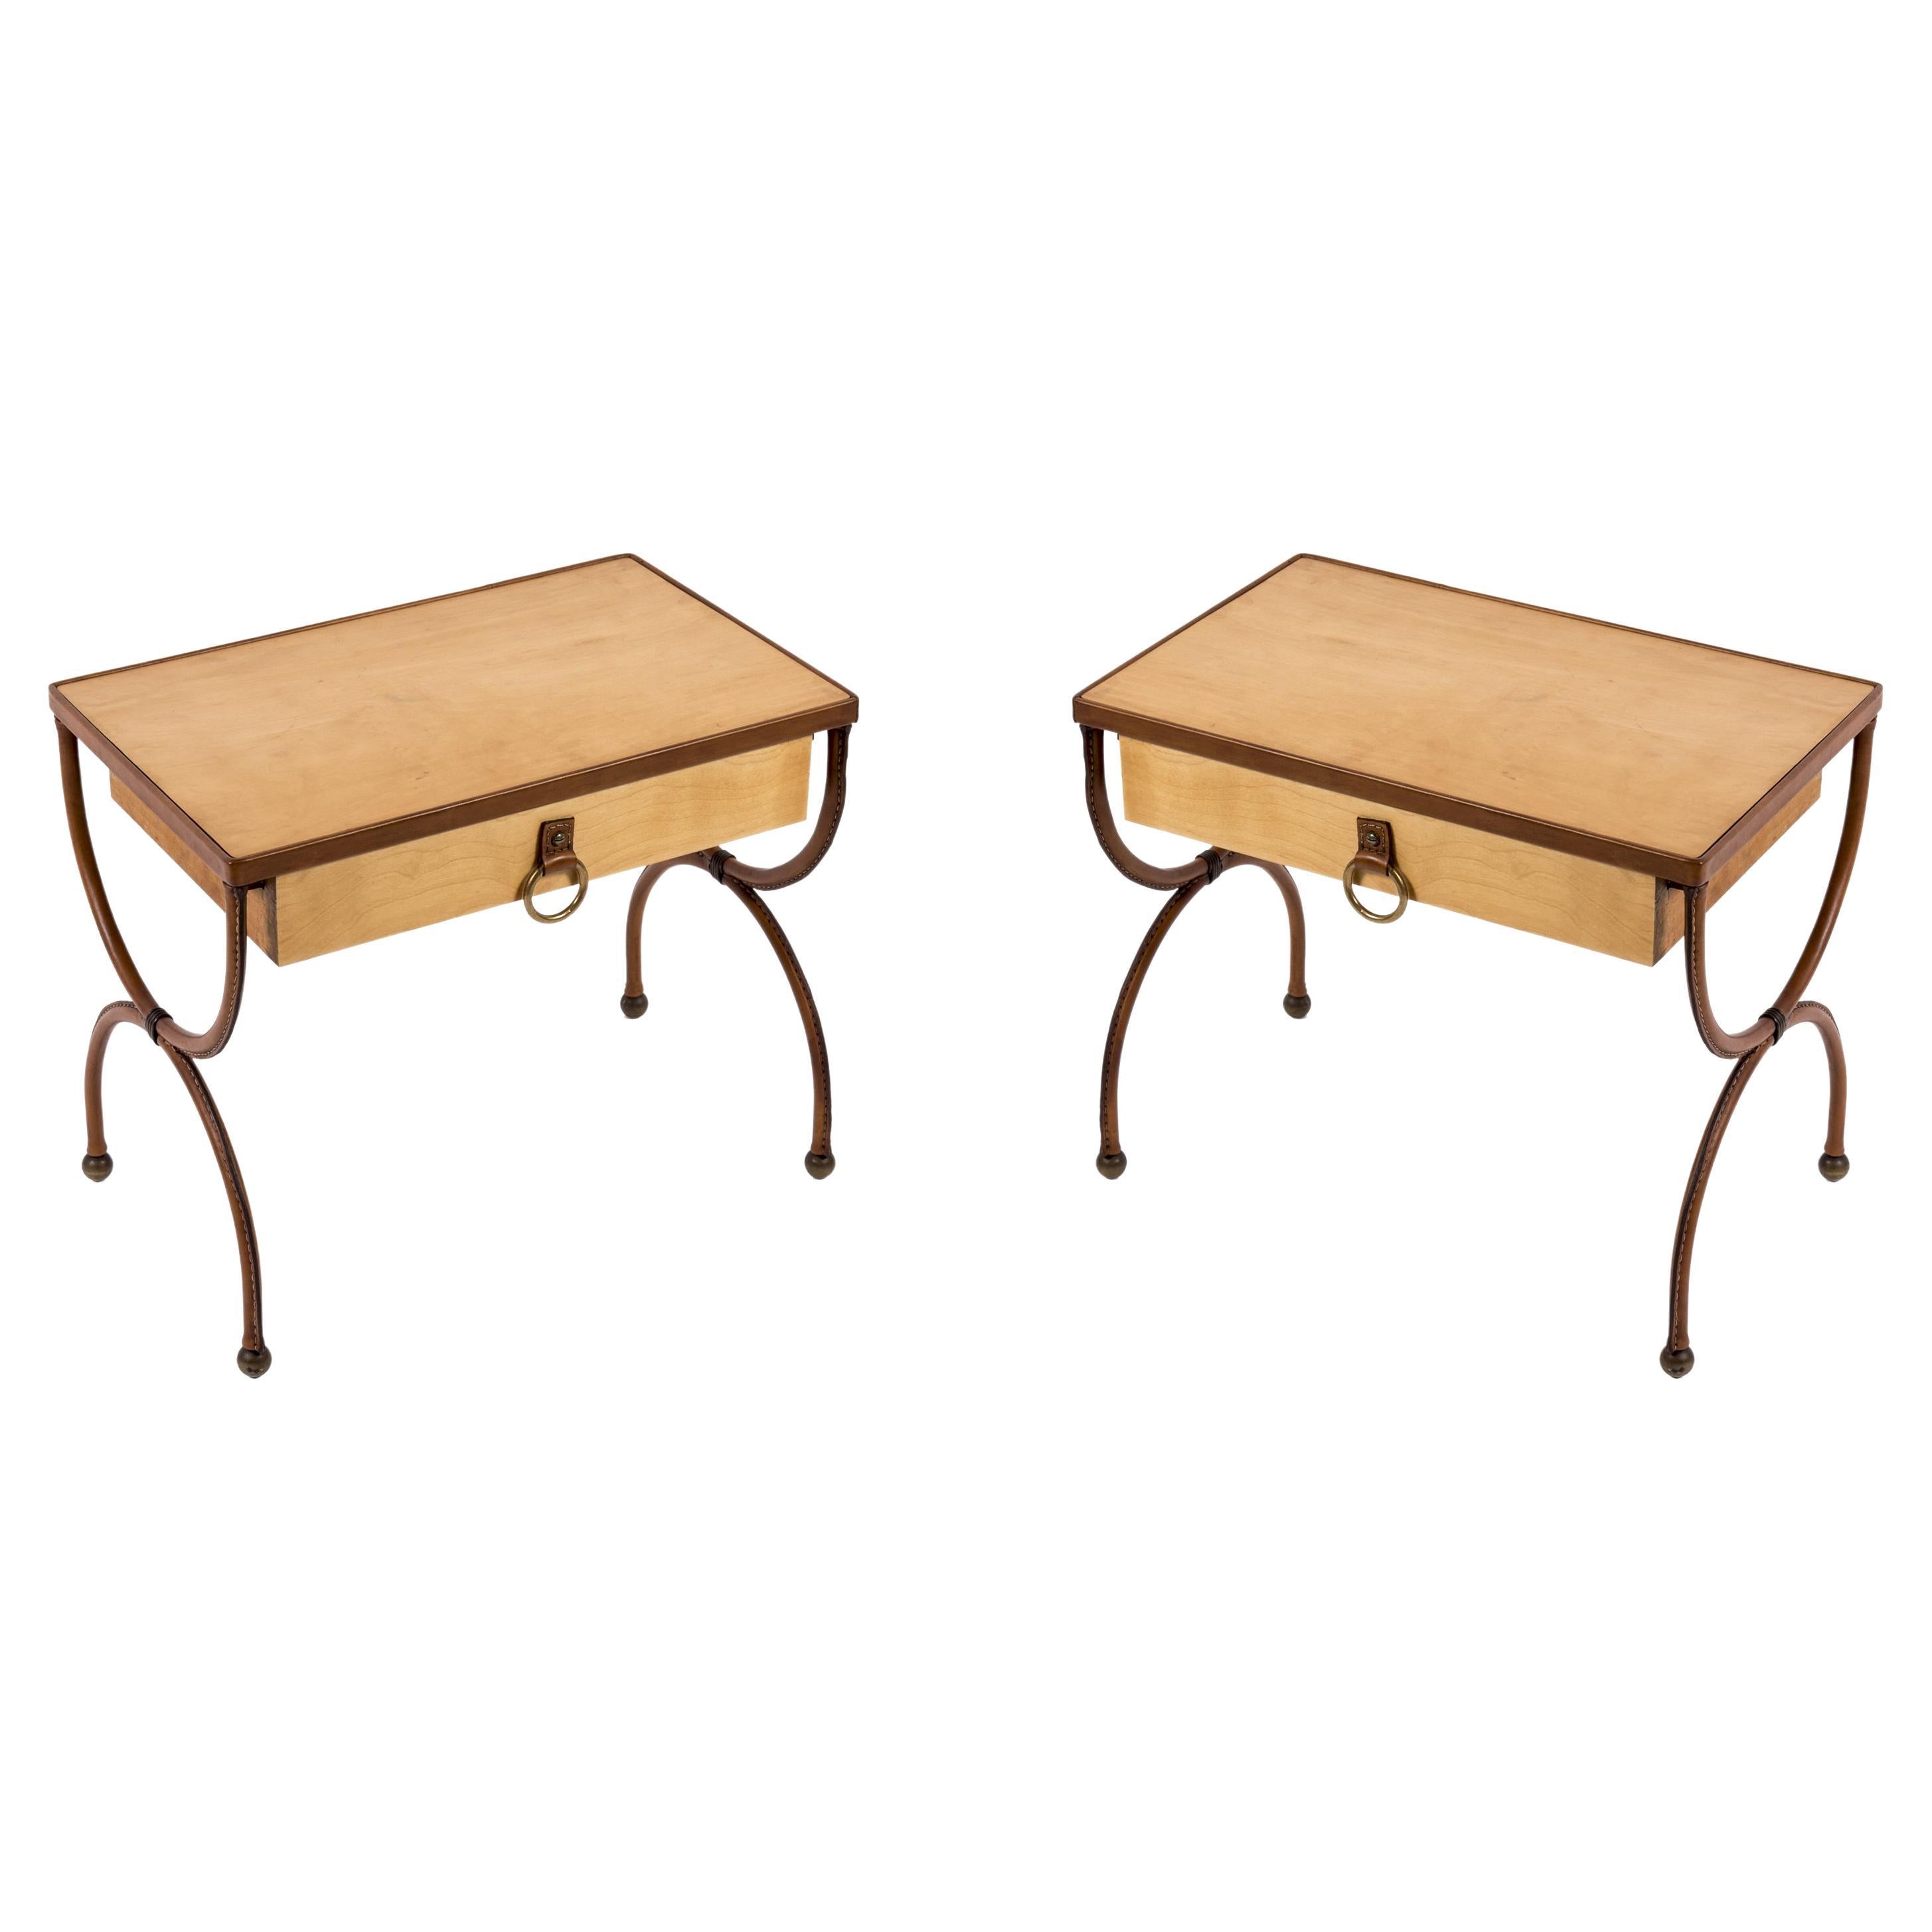 Pair of Stitched Leather Side Tables by Jacques Adnet